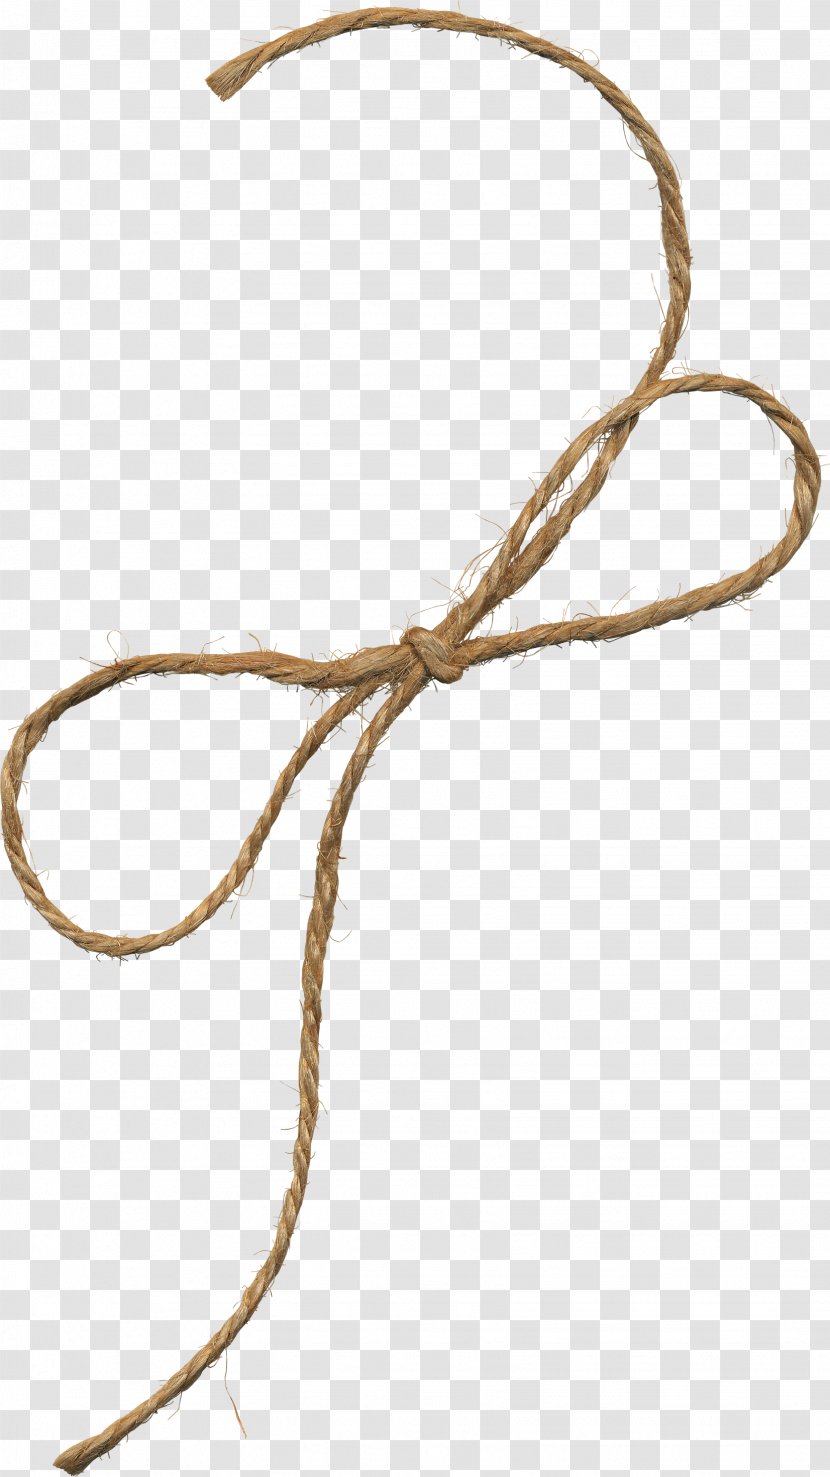 Rope Hemp Shoelace Knot - Bow Transparent PNG